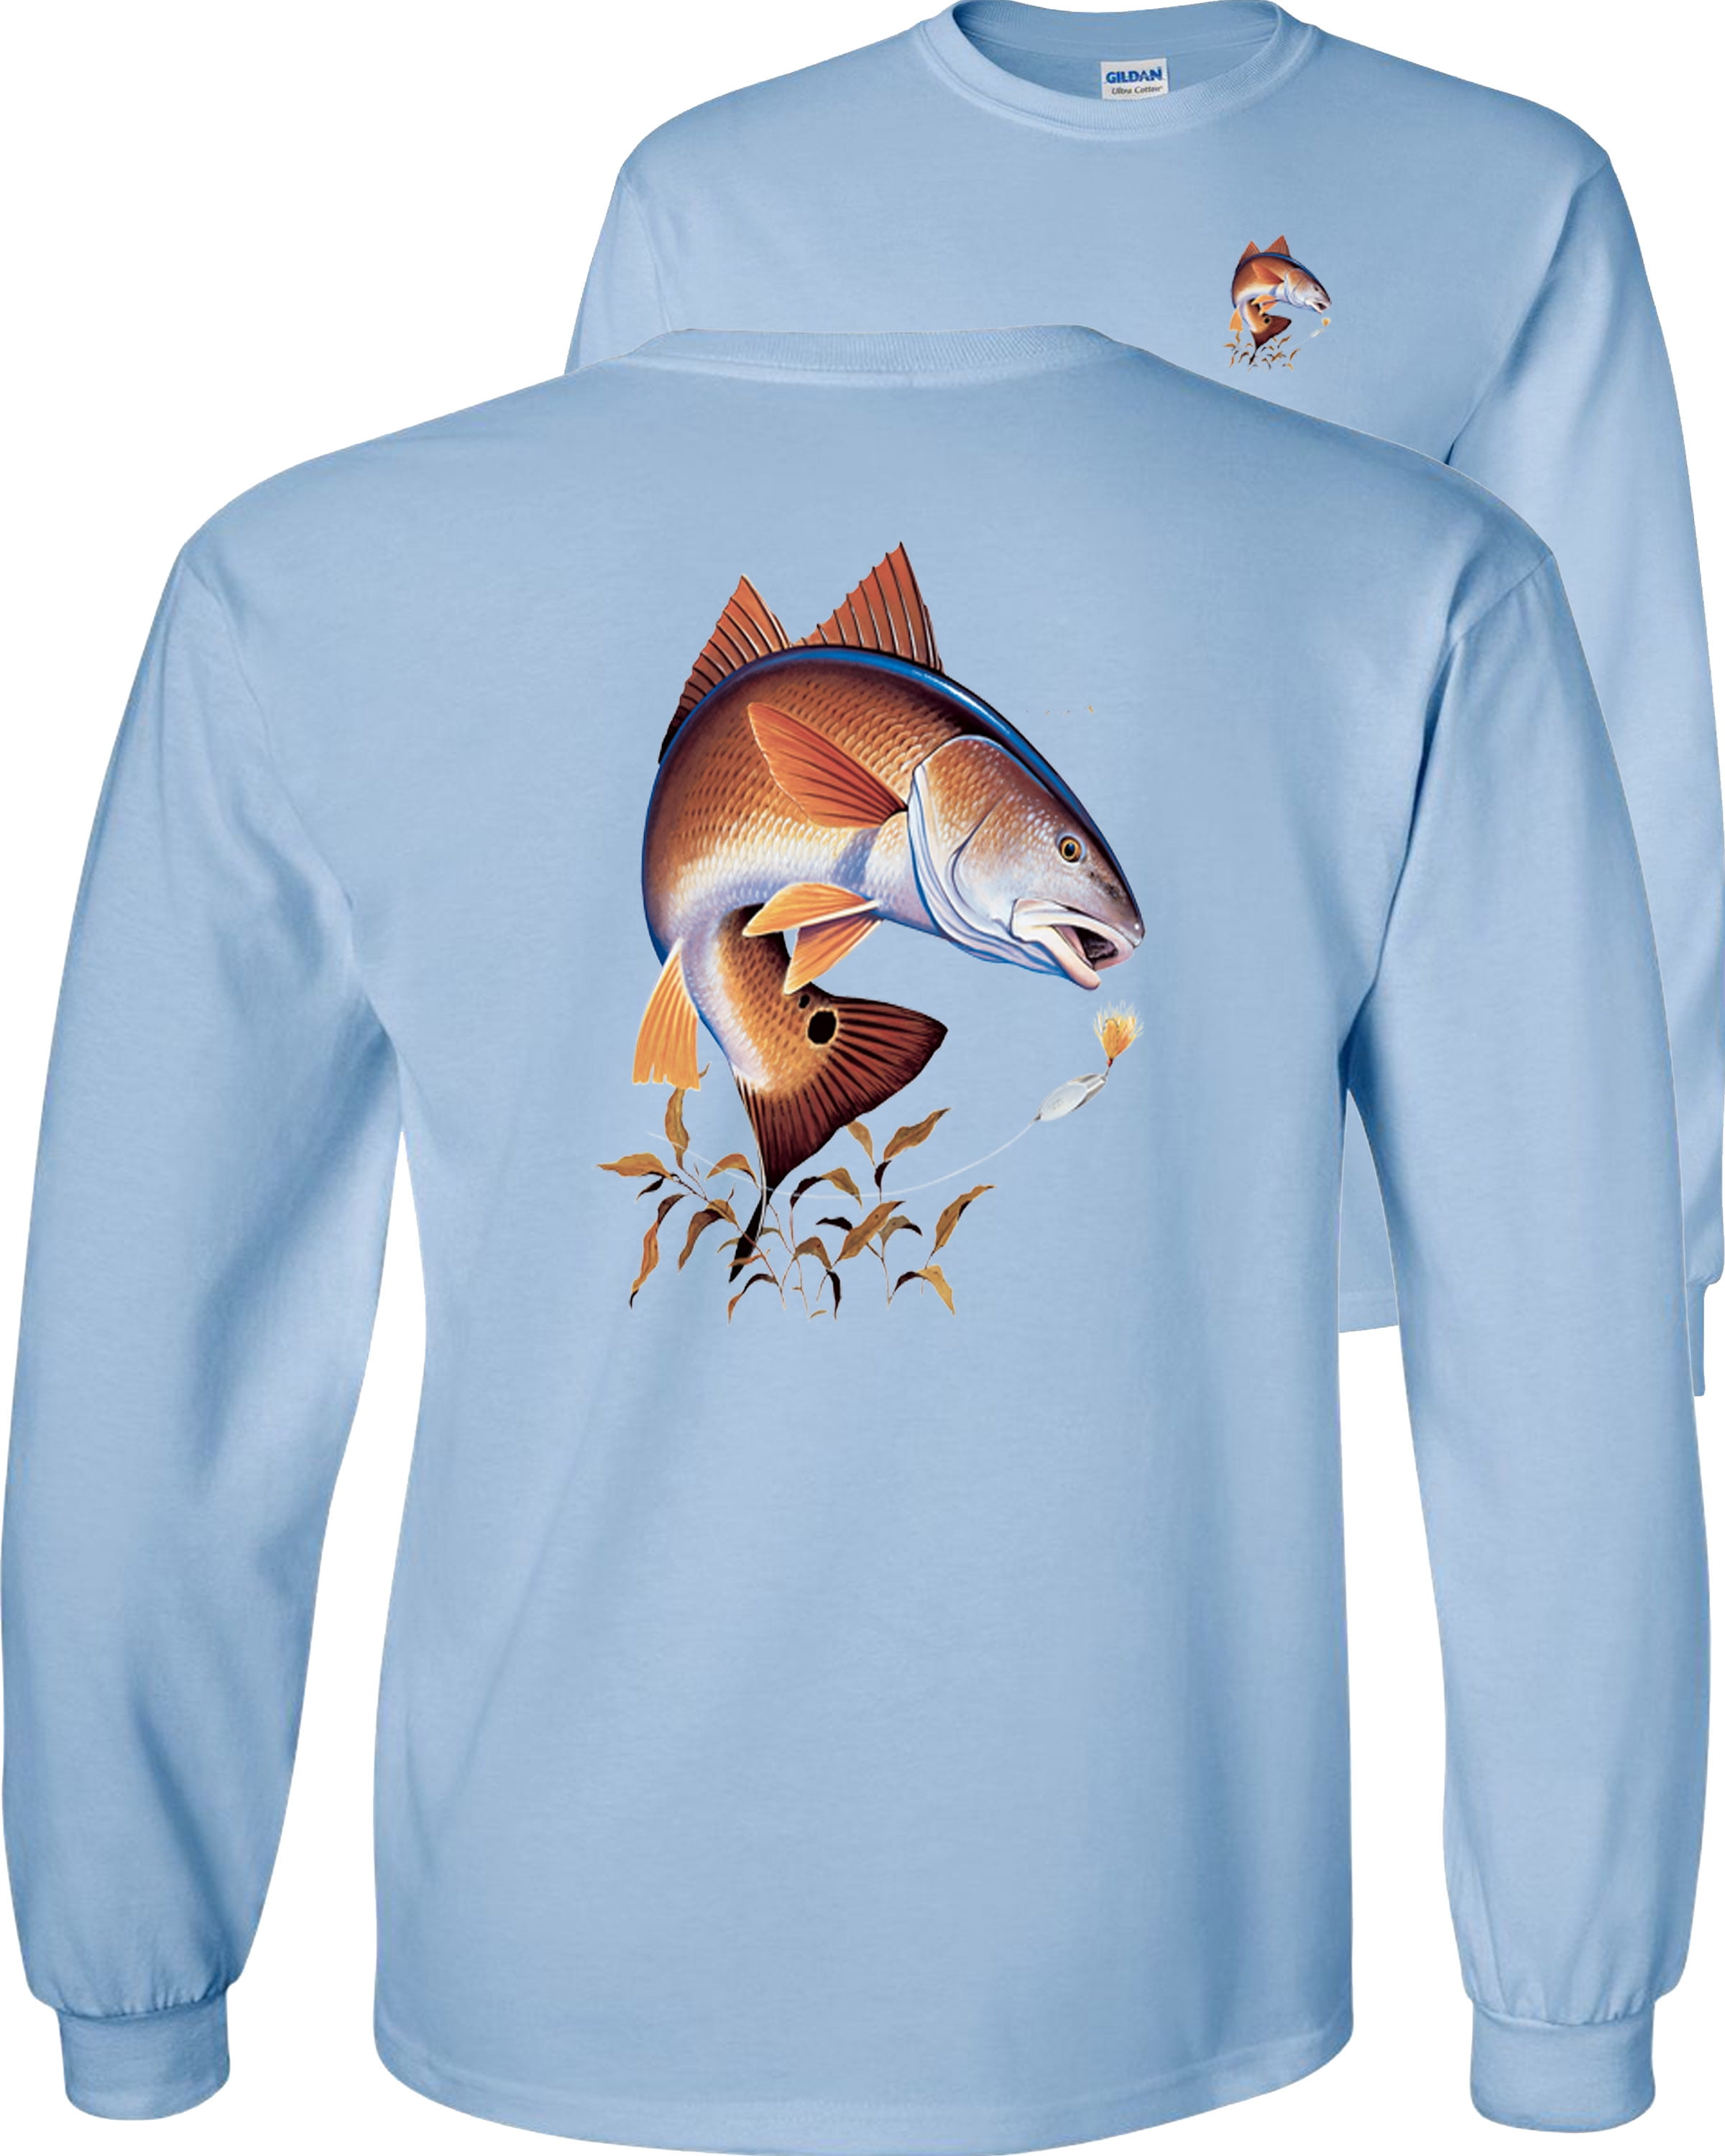 Fair Game Catfish Long Sleeve Shirt, River Blue Channel, Fishing Graphic  Tee-Light Blue-Large 